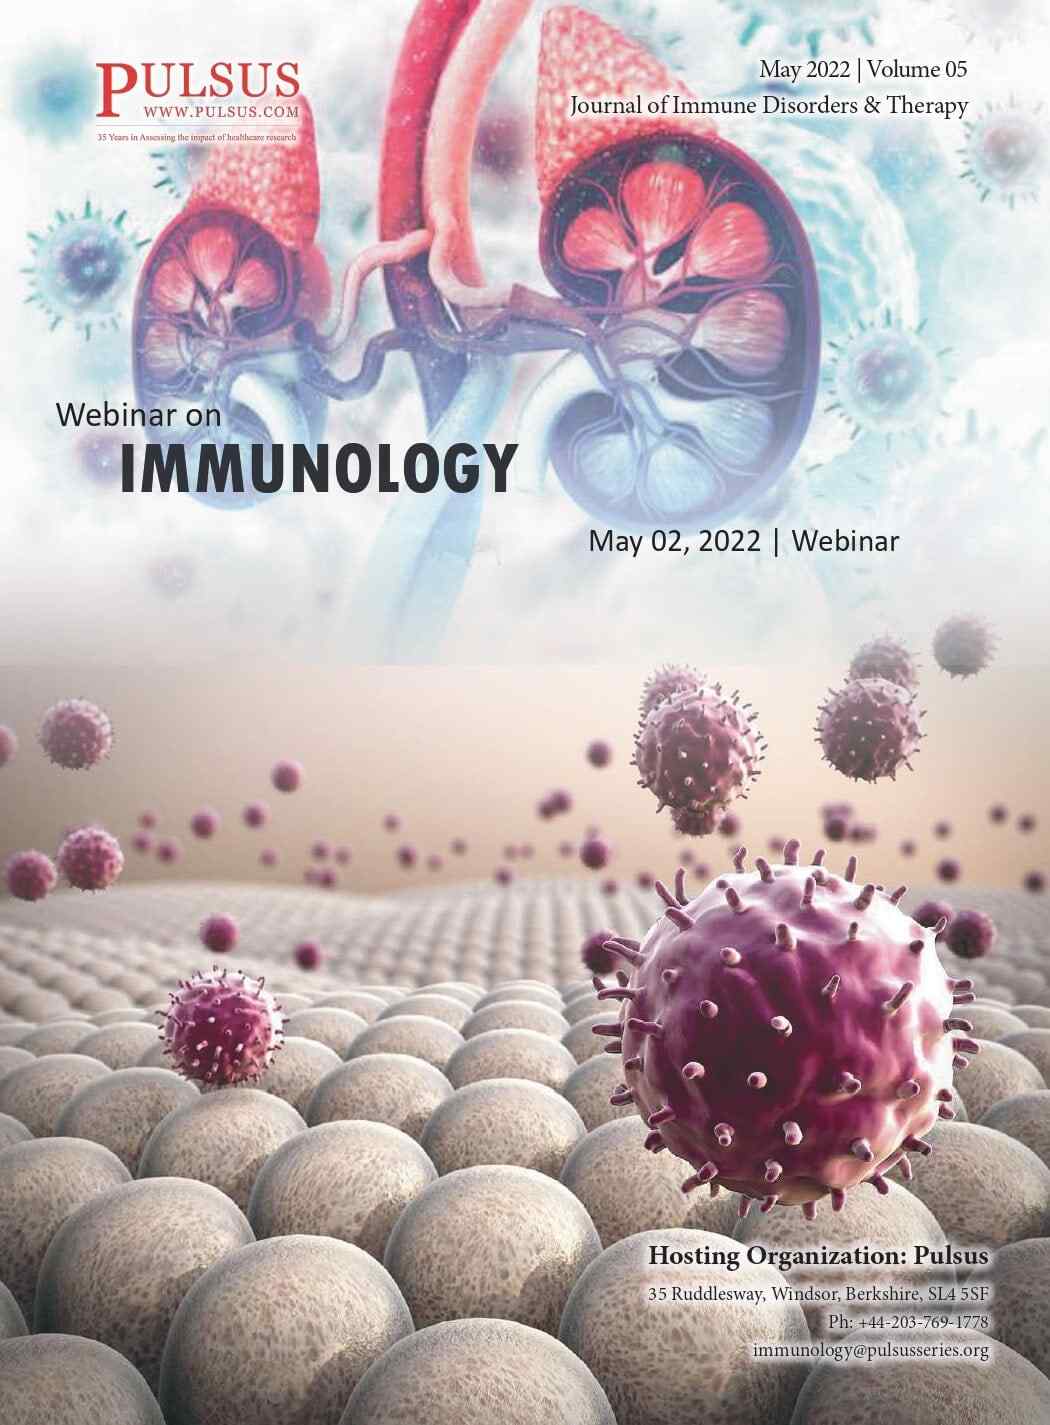 https://www.pulsus.com/conference-abstracts/clinical-immunology-2022-proceedings.html